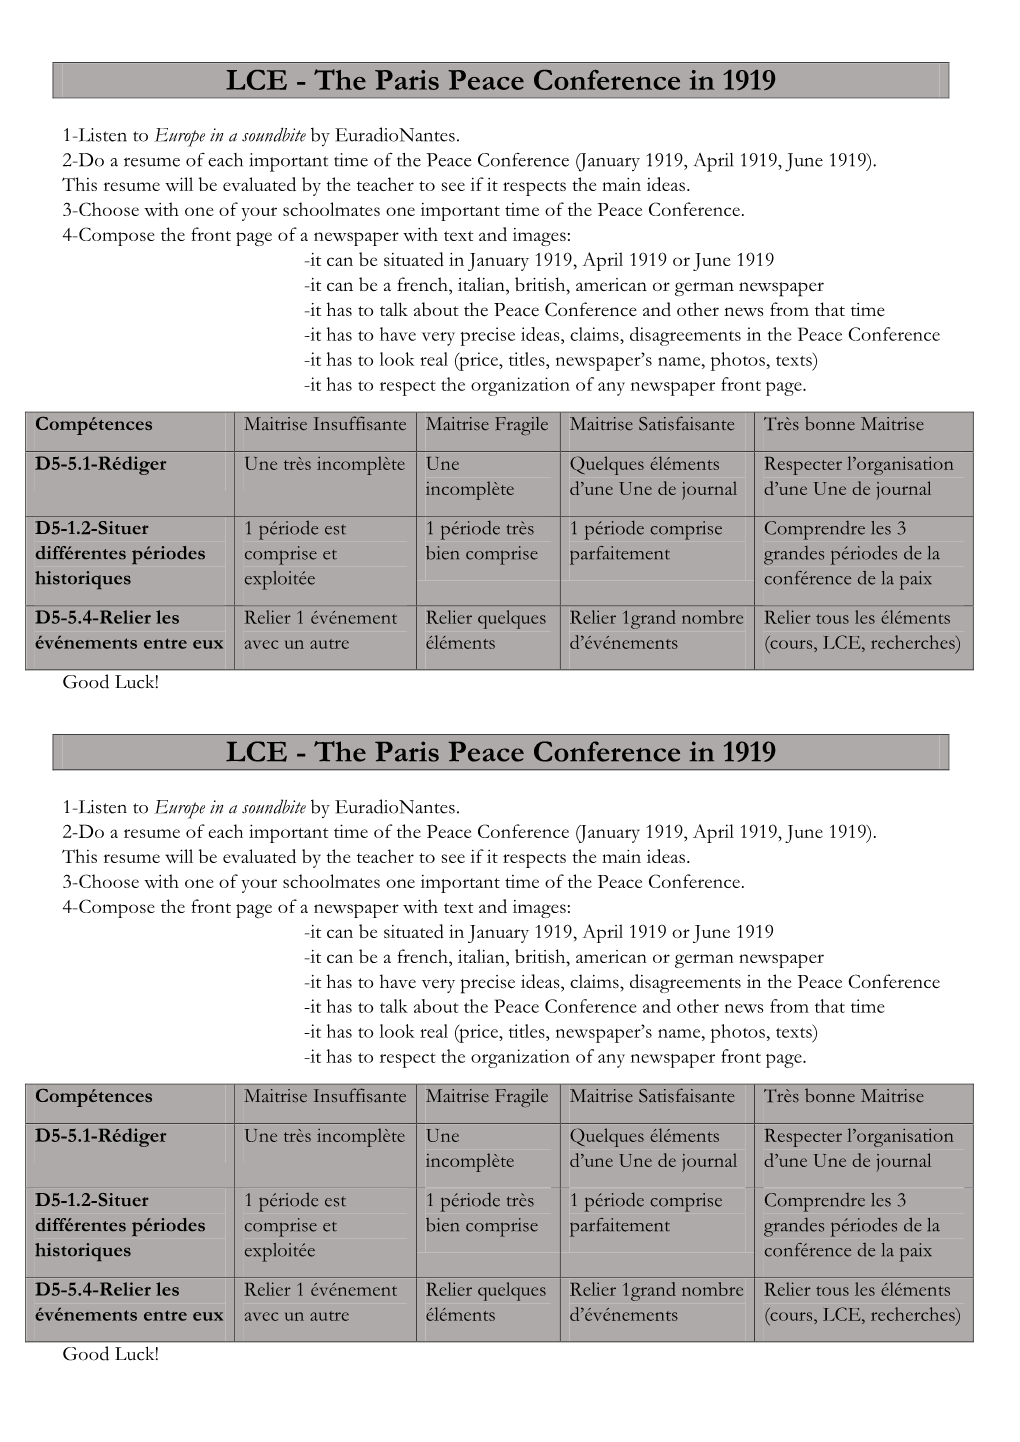 The Paris Peace Conference in 1919